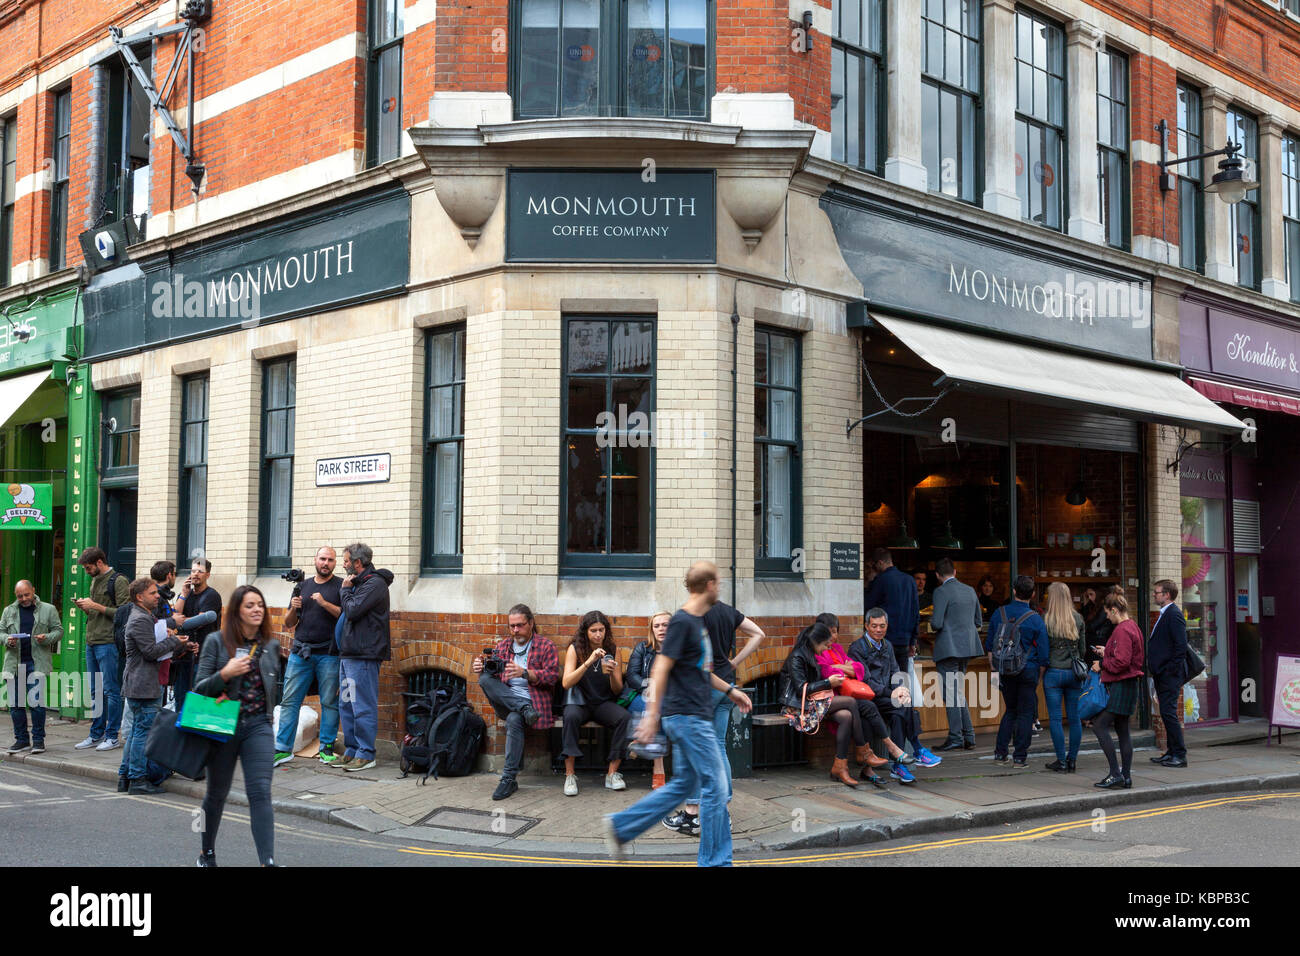 Le Monmouth Coffee Company, Borough Market, London, Angleterre, Royaume-Uni Banque D'Images